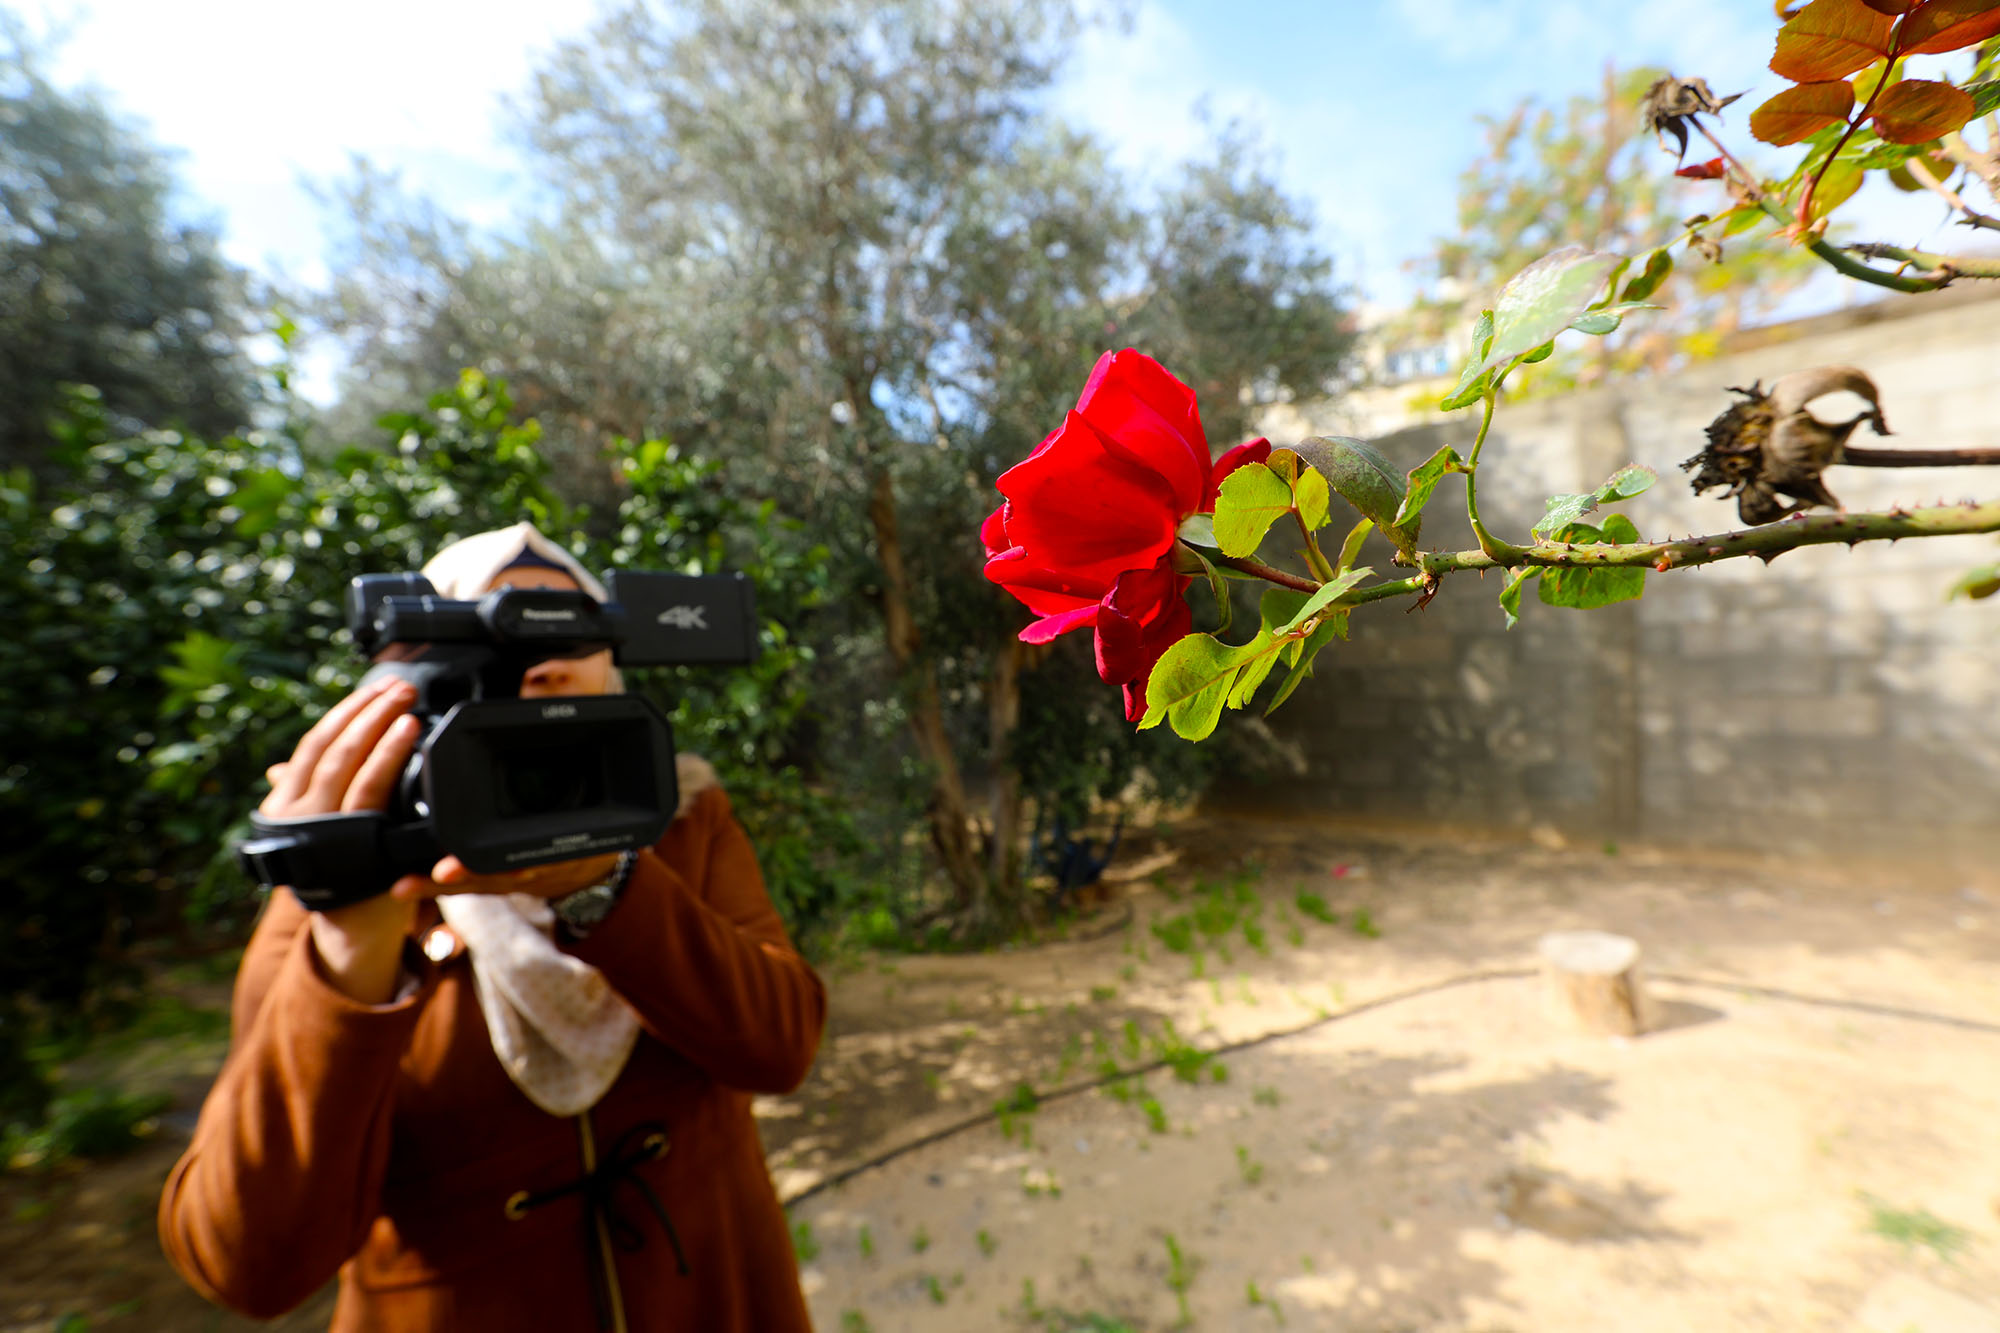 A Palestinian woman in Beit Hanoun, Gaza operates a video camera as part of a training course offered by Anera in photography.